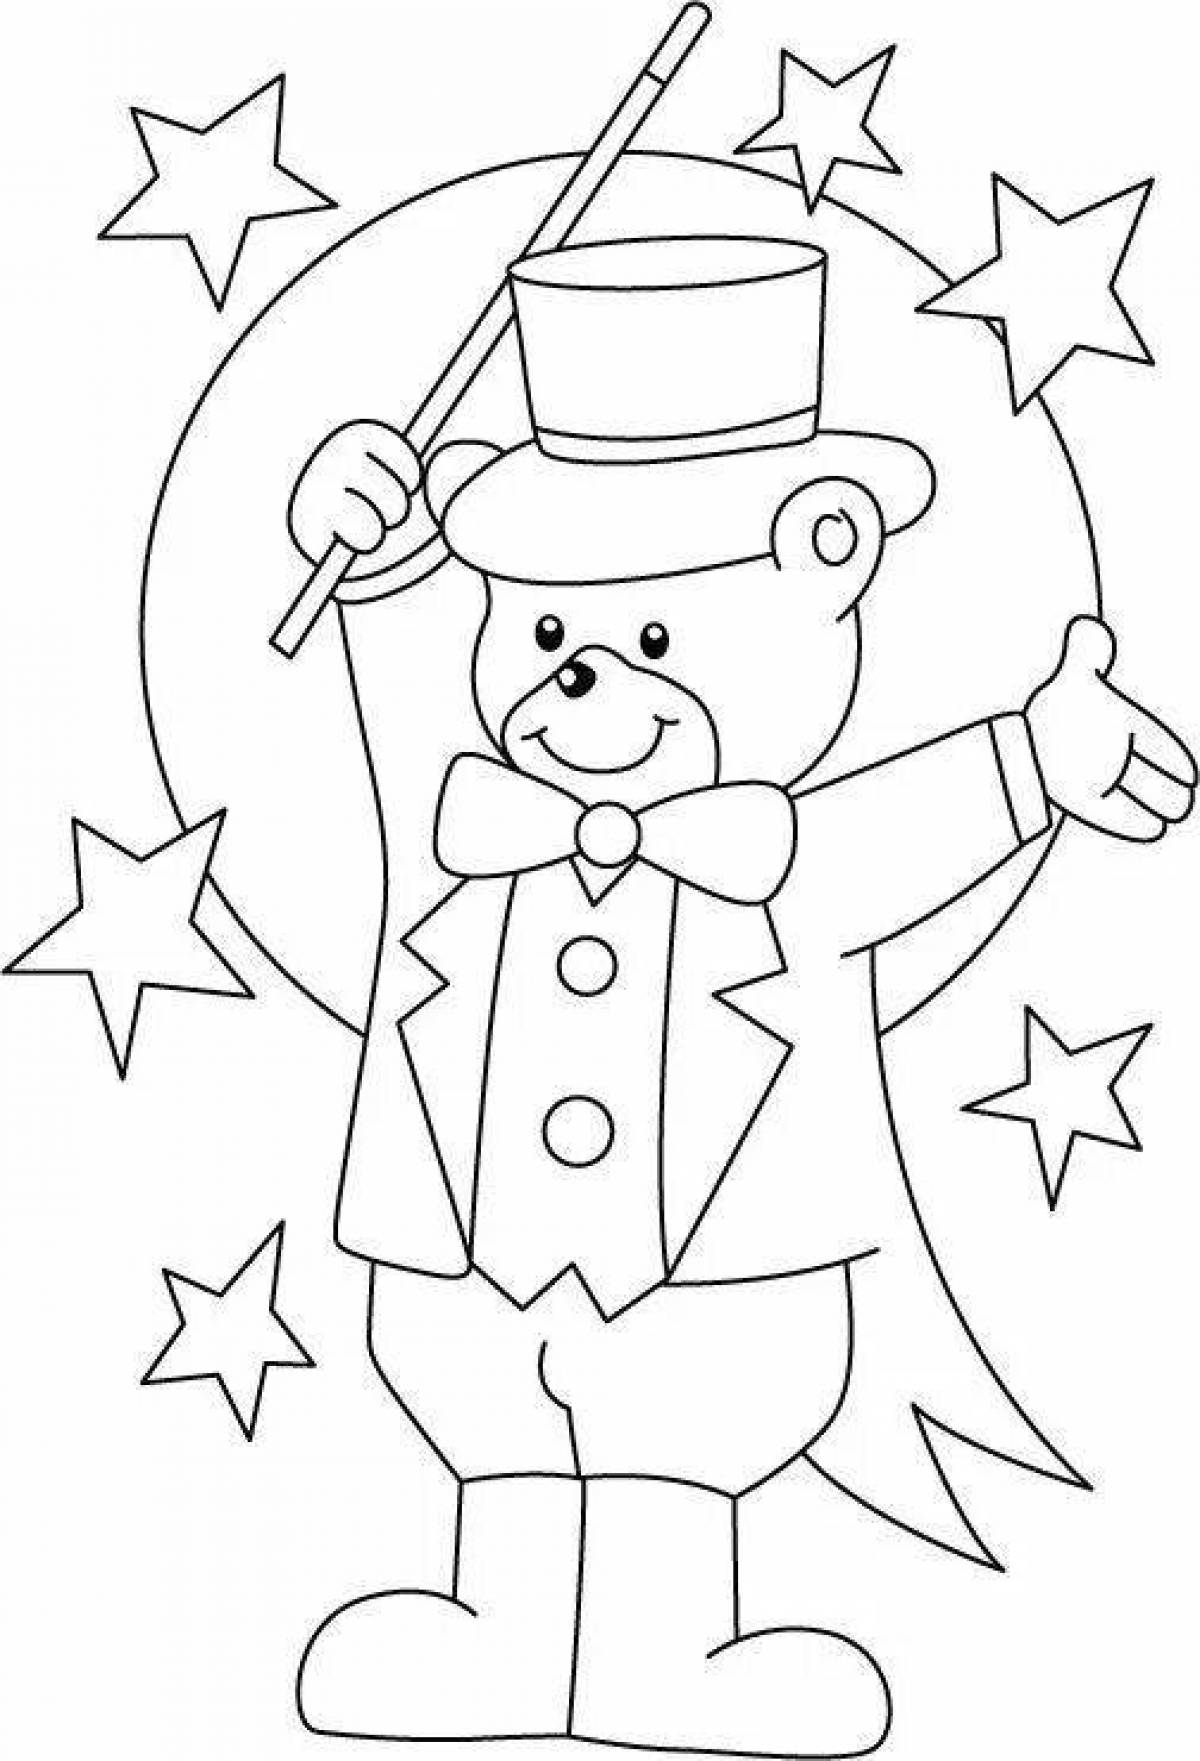 Inspirational circus coloring book for 6-7 year olds